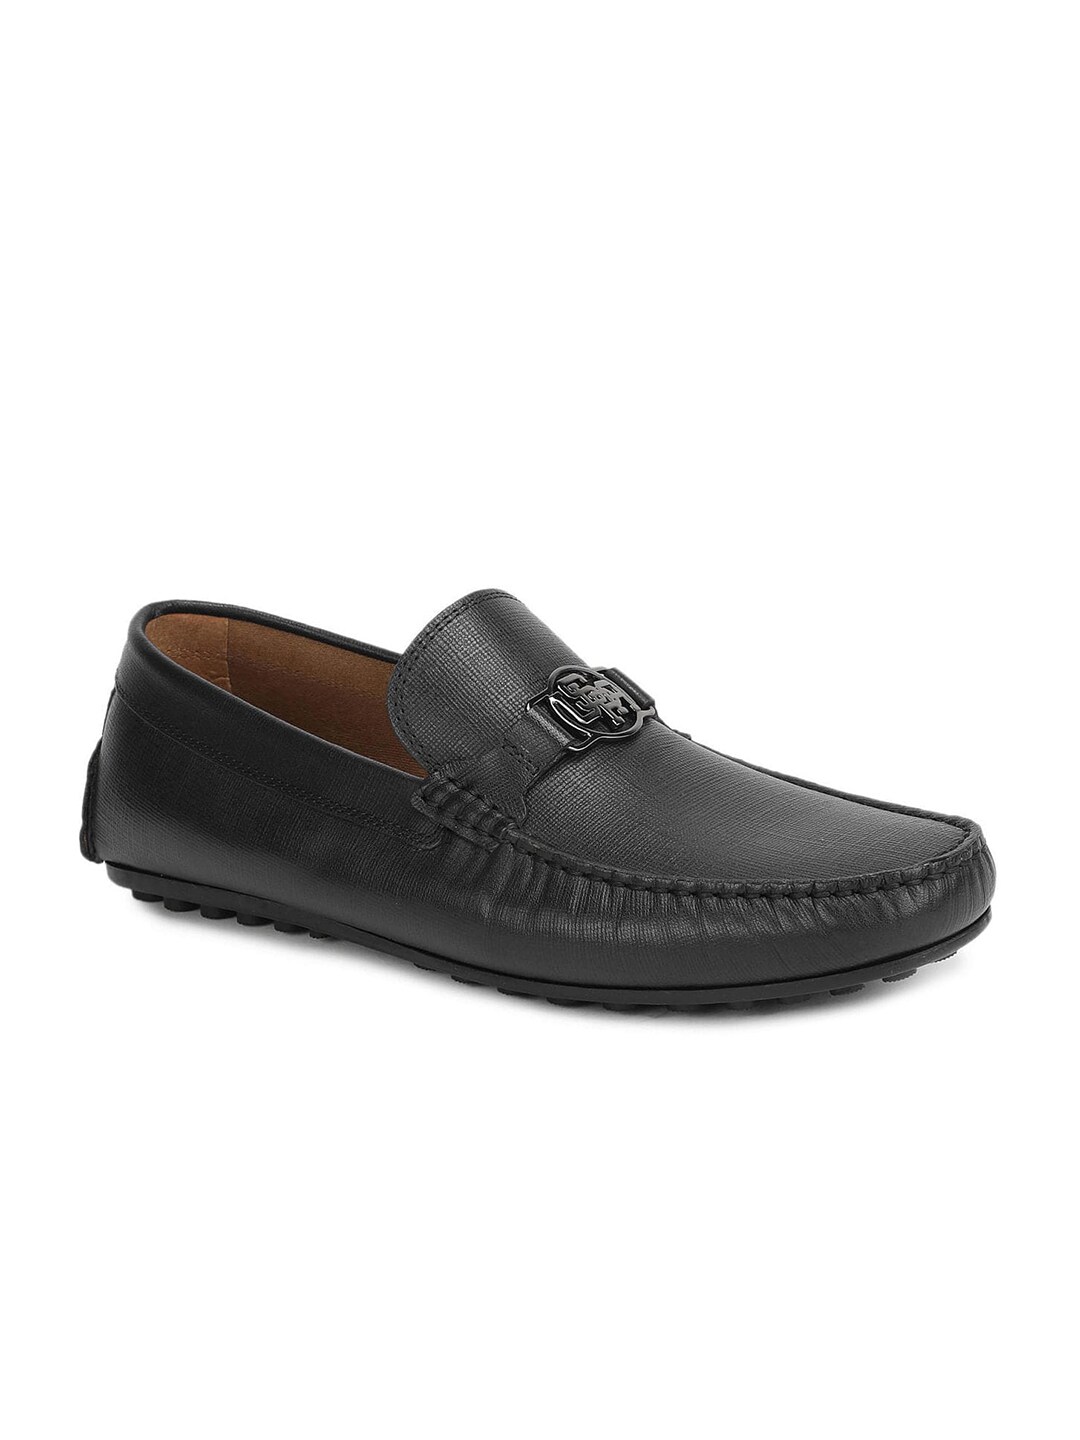 U S Polo Assn Men Black Leather Loafers